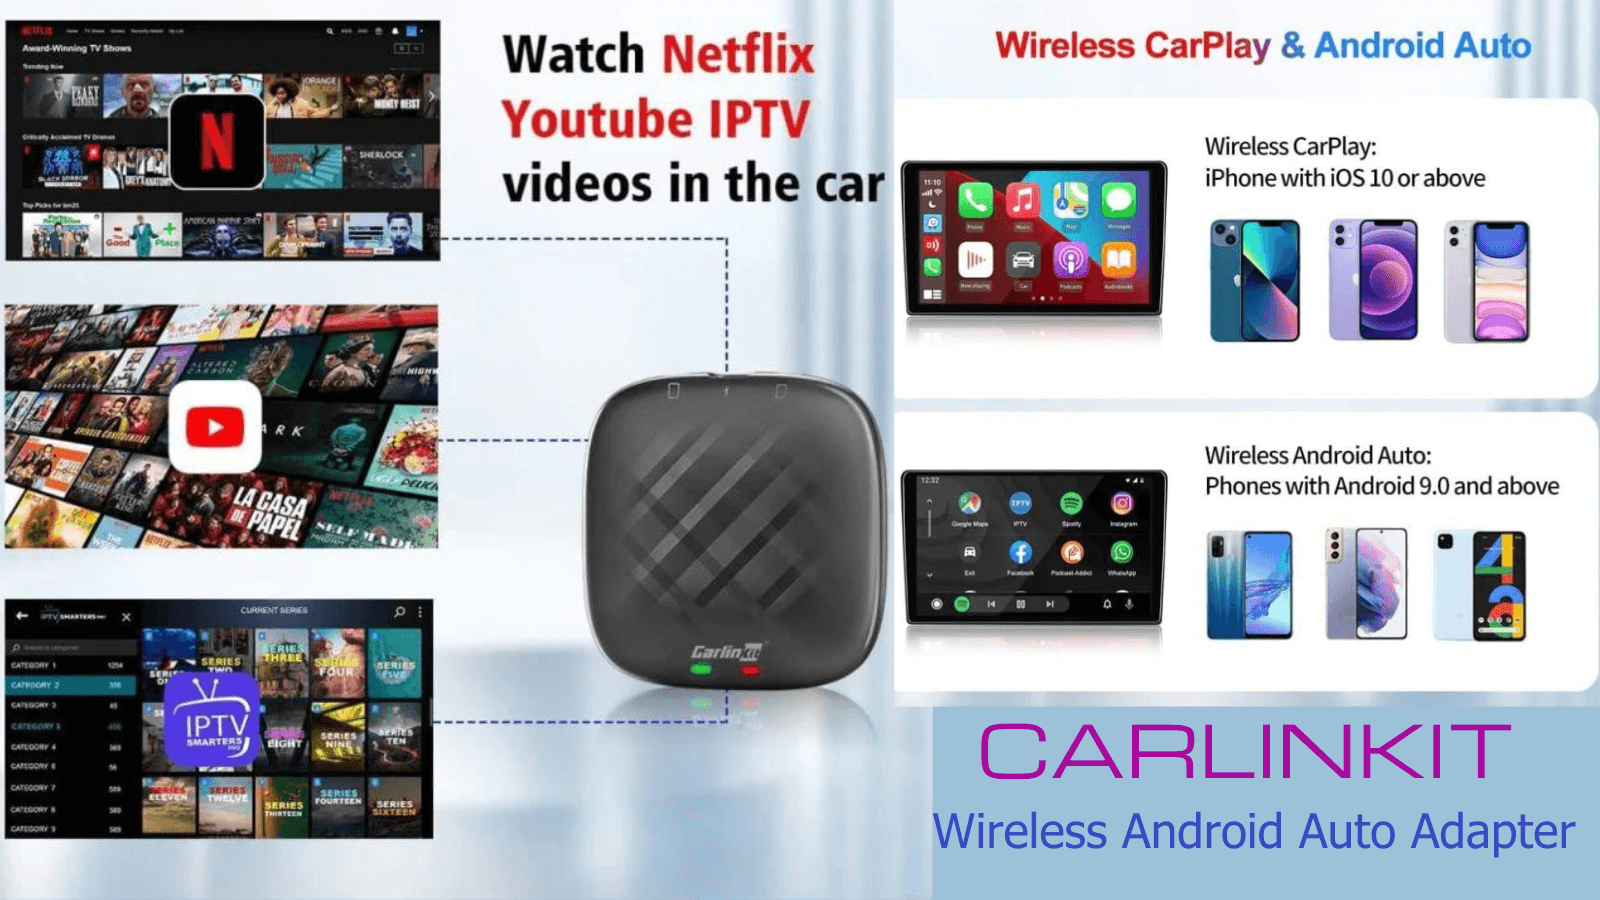 Carlinkit Wireless Android Adapter for Netflix and Youtube